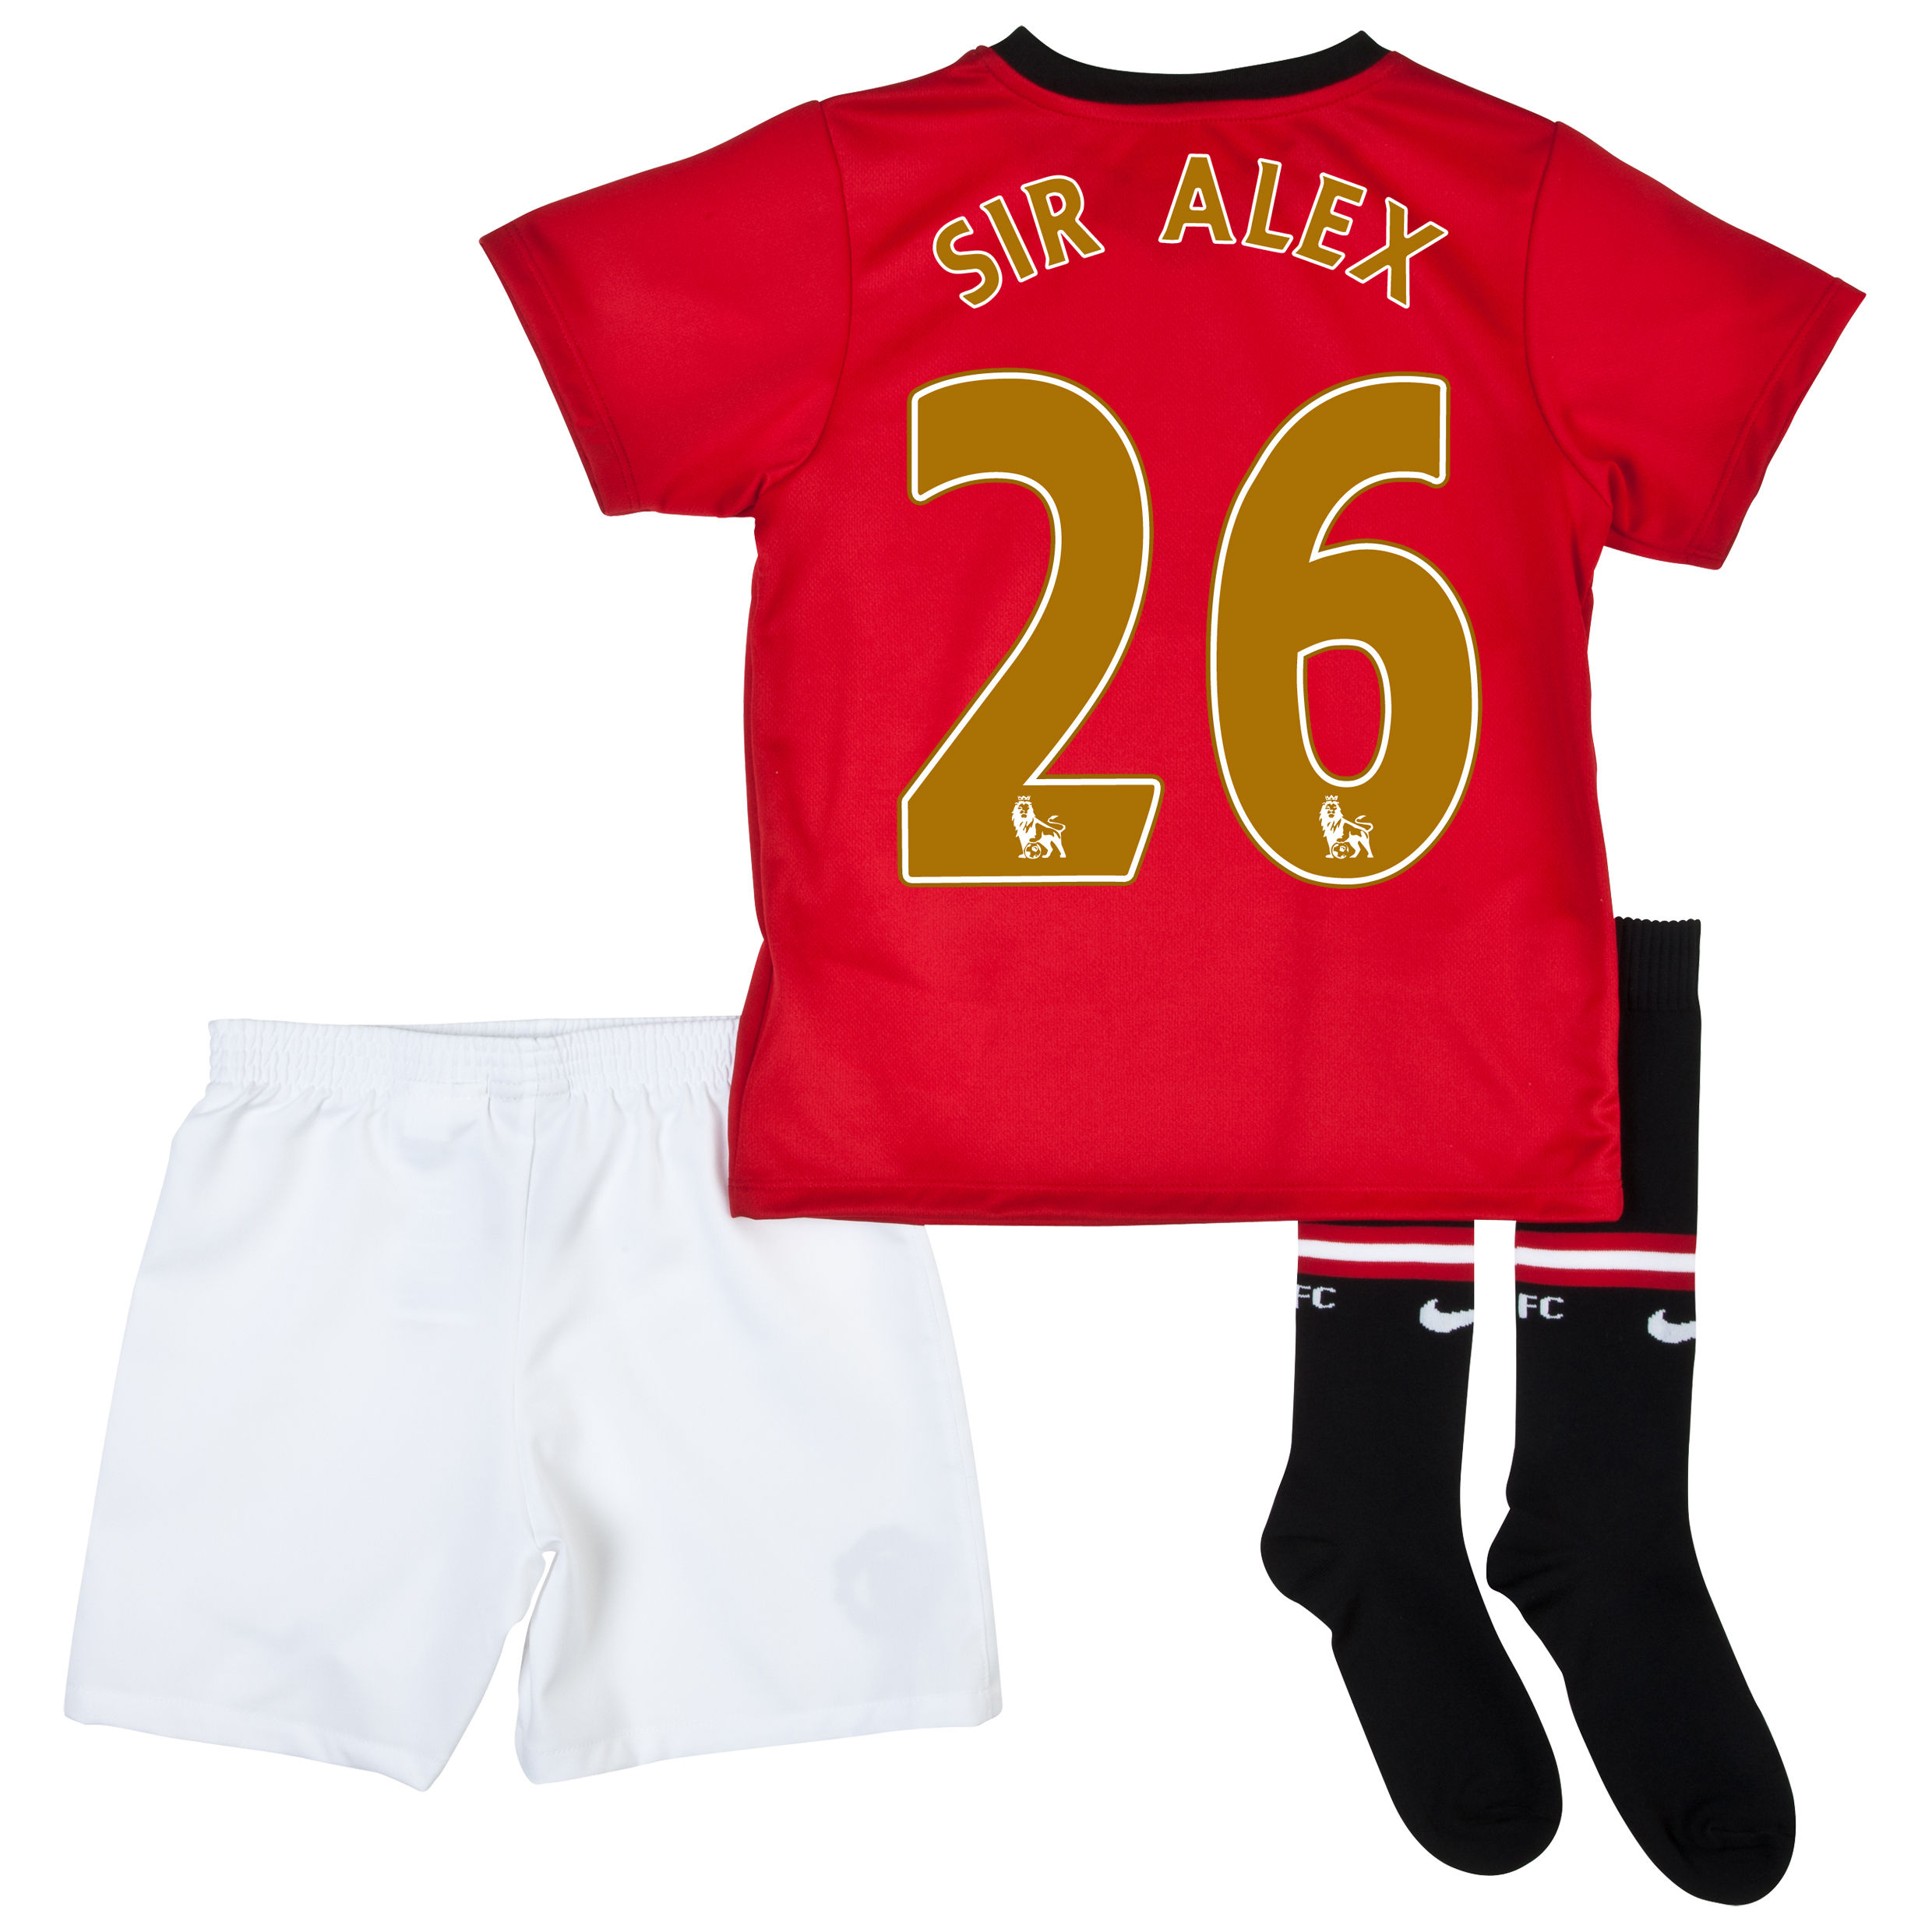 Manchester United Home Kit 2013/14 - Little Boys with Sir Alex 26 printing